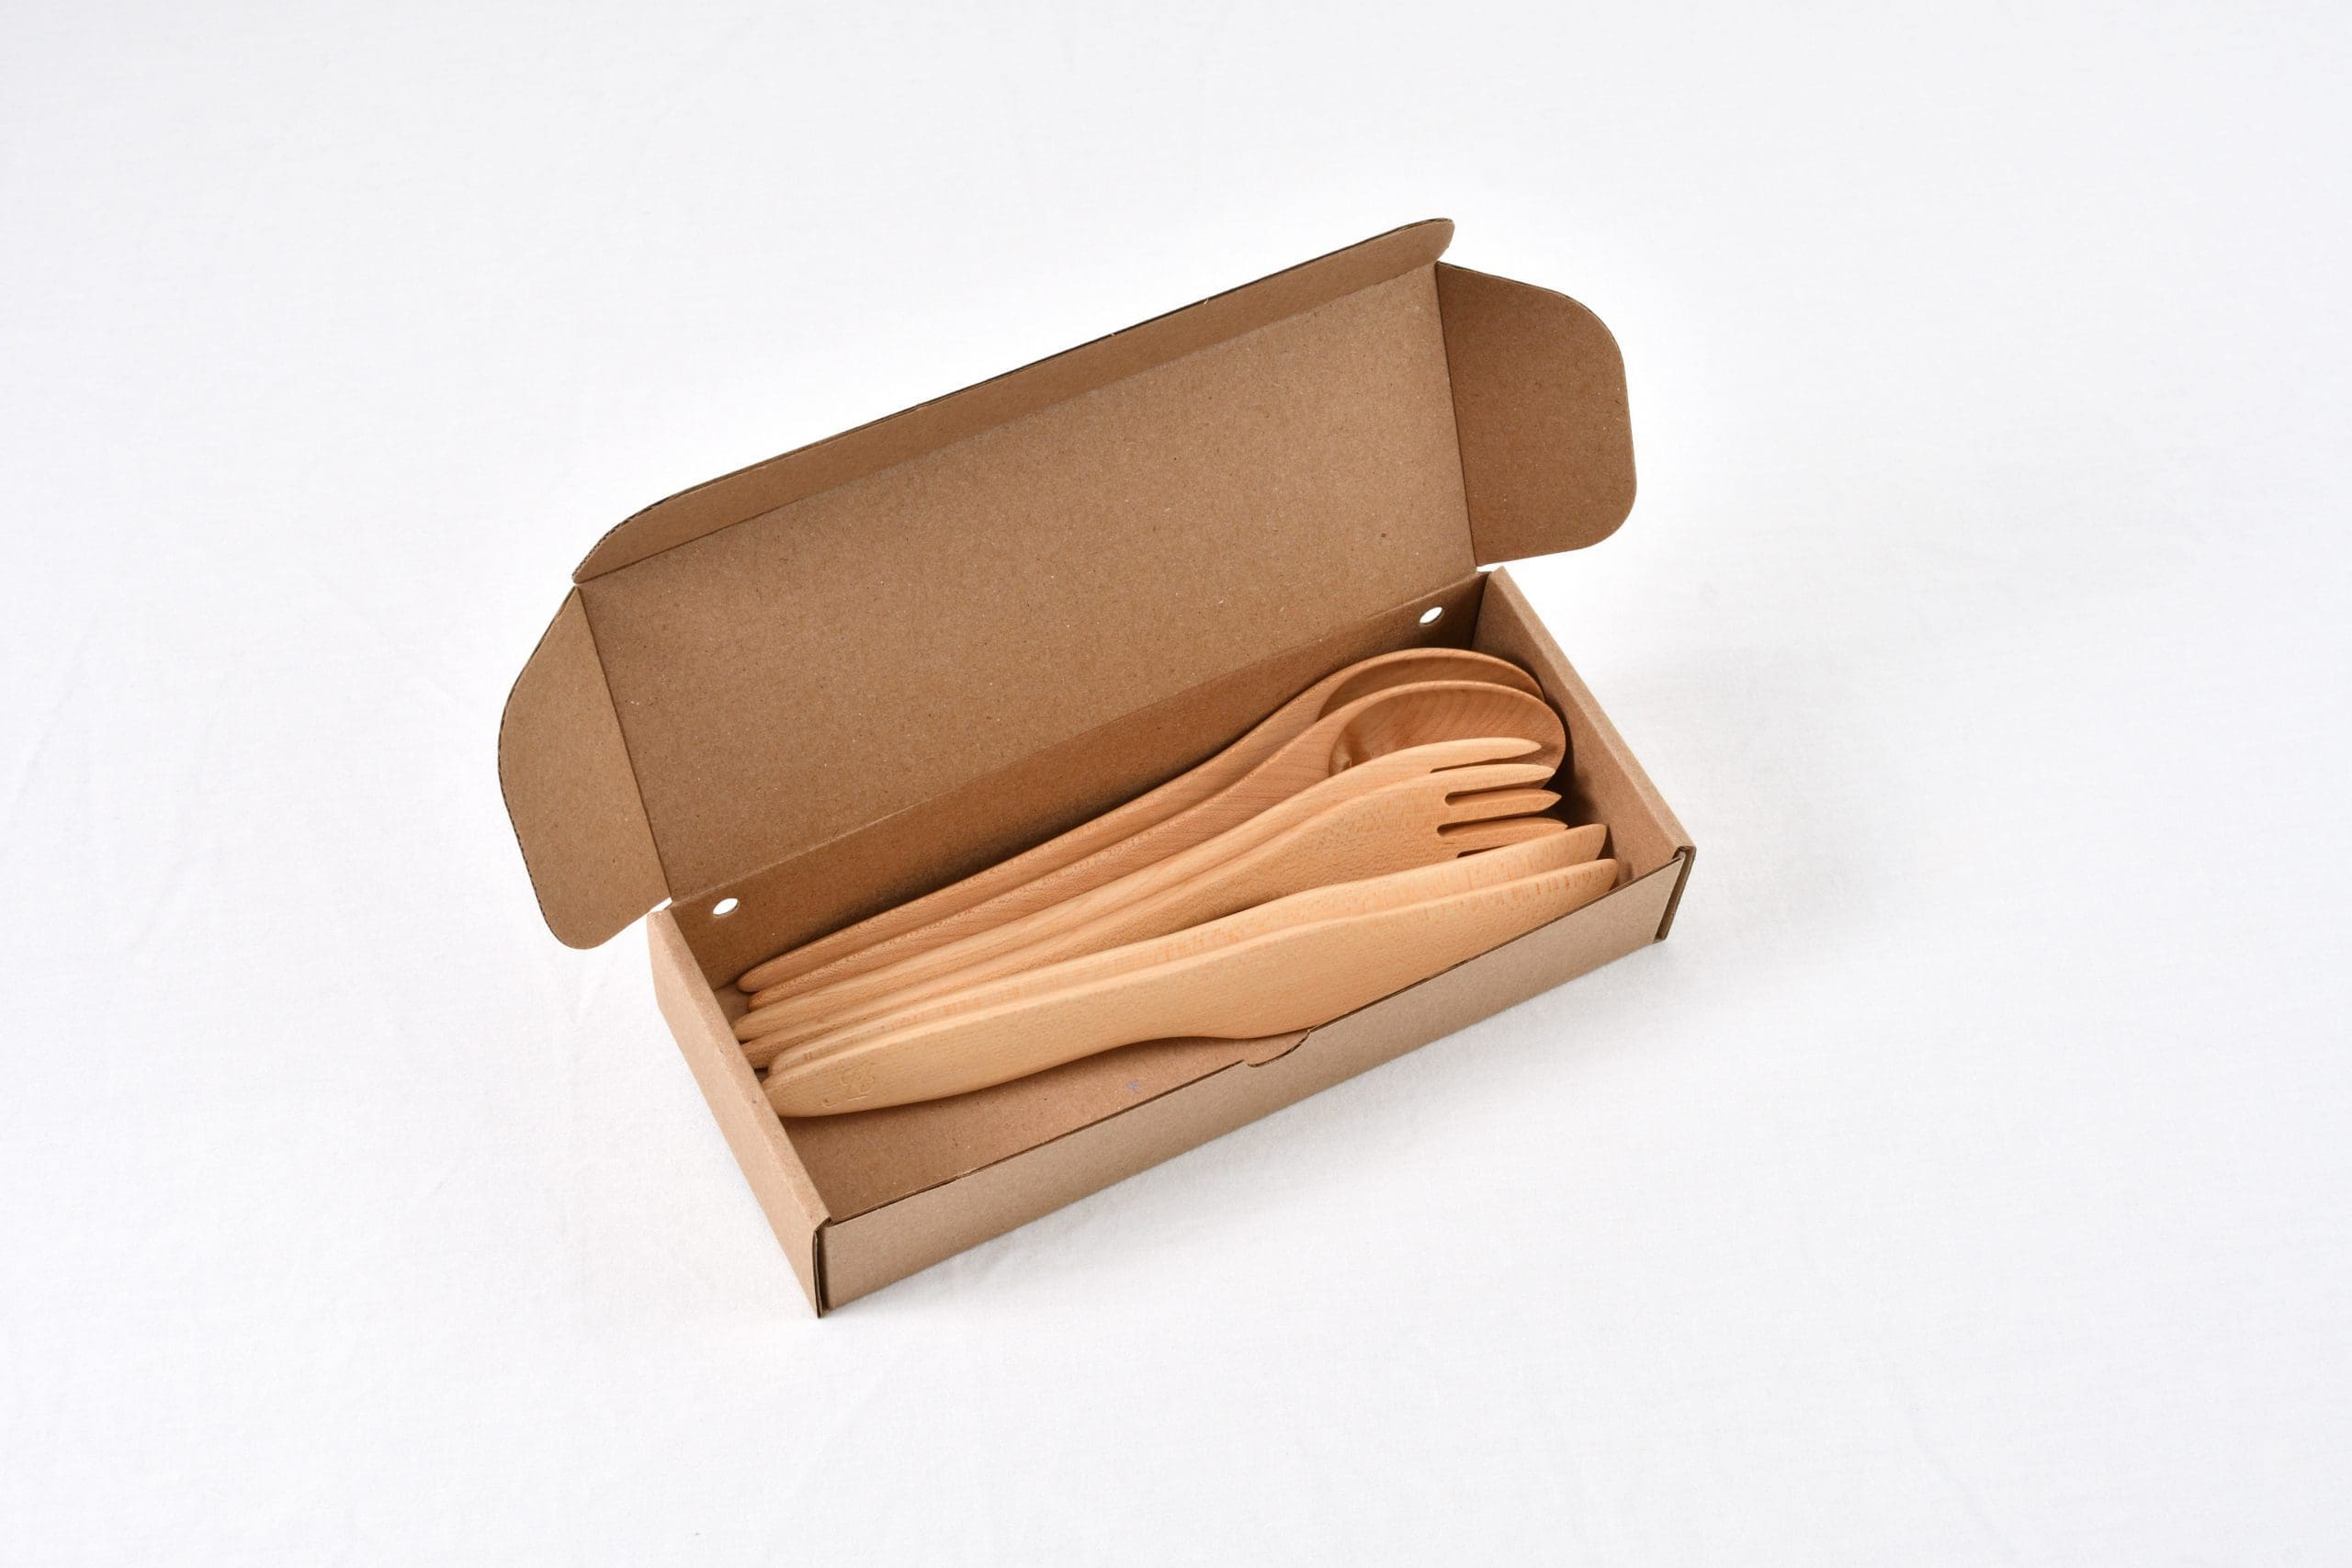 https://justenbois.com/wp-content/uploads/2022/07/2-SETS-of-Cutlery-in-Box-scaled.jpg